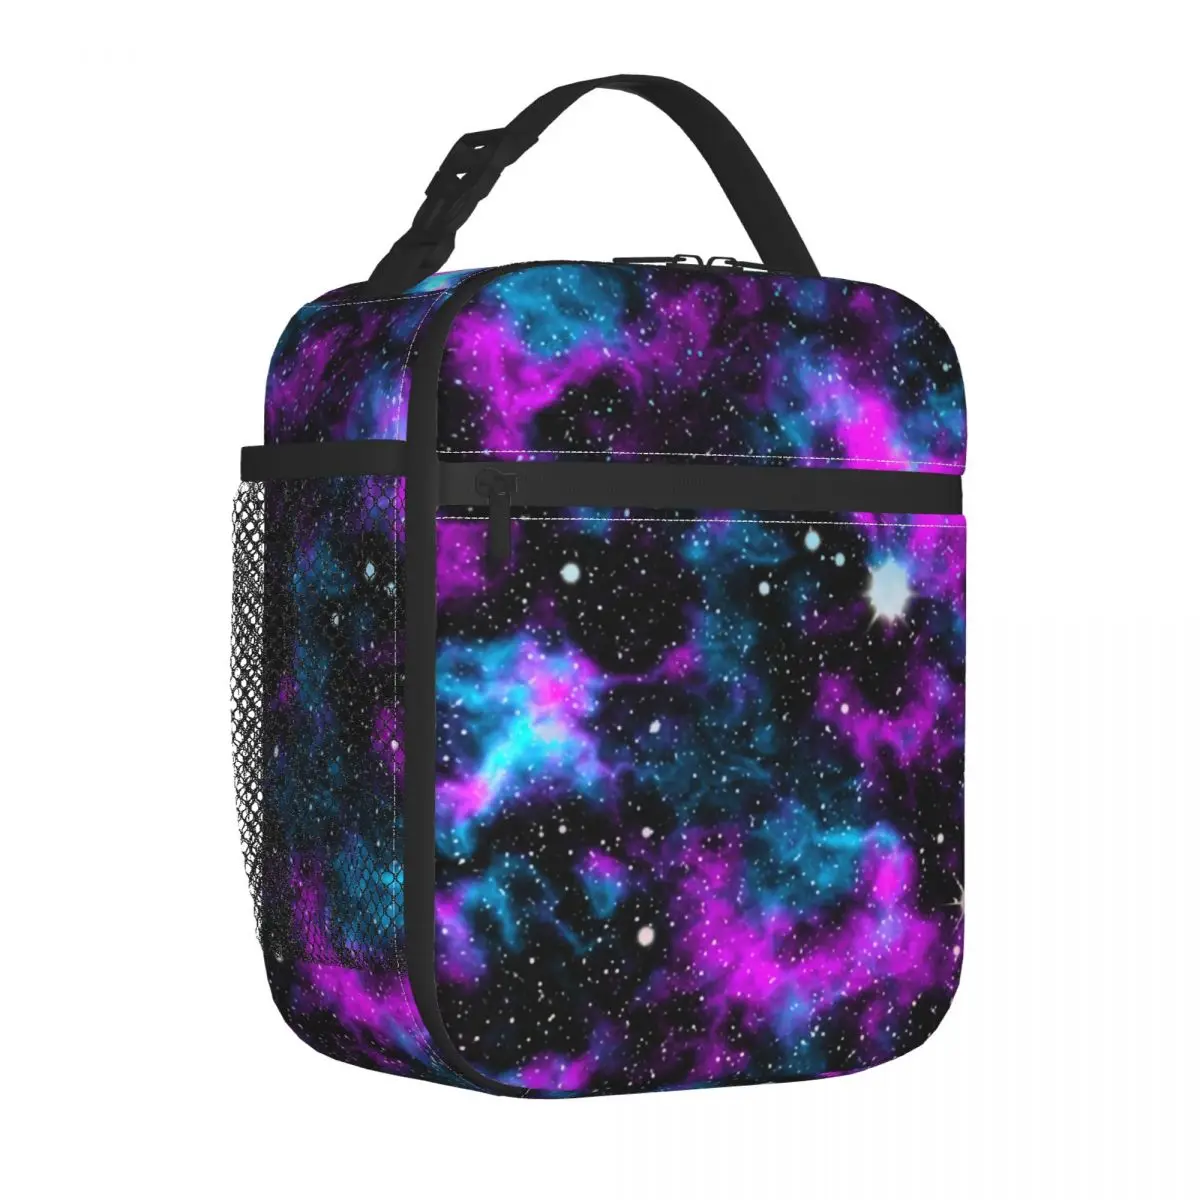 

Blue And Purple Galaxy Lunch Bag with Handle Cosmic Neon Print Food Mesh Pocket Cooler Bag Cool Zipper Takeaway Thermal Bag